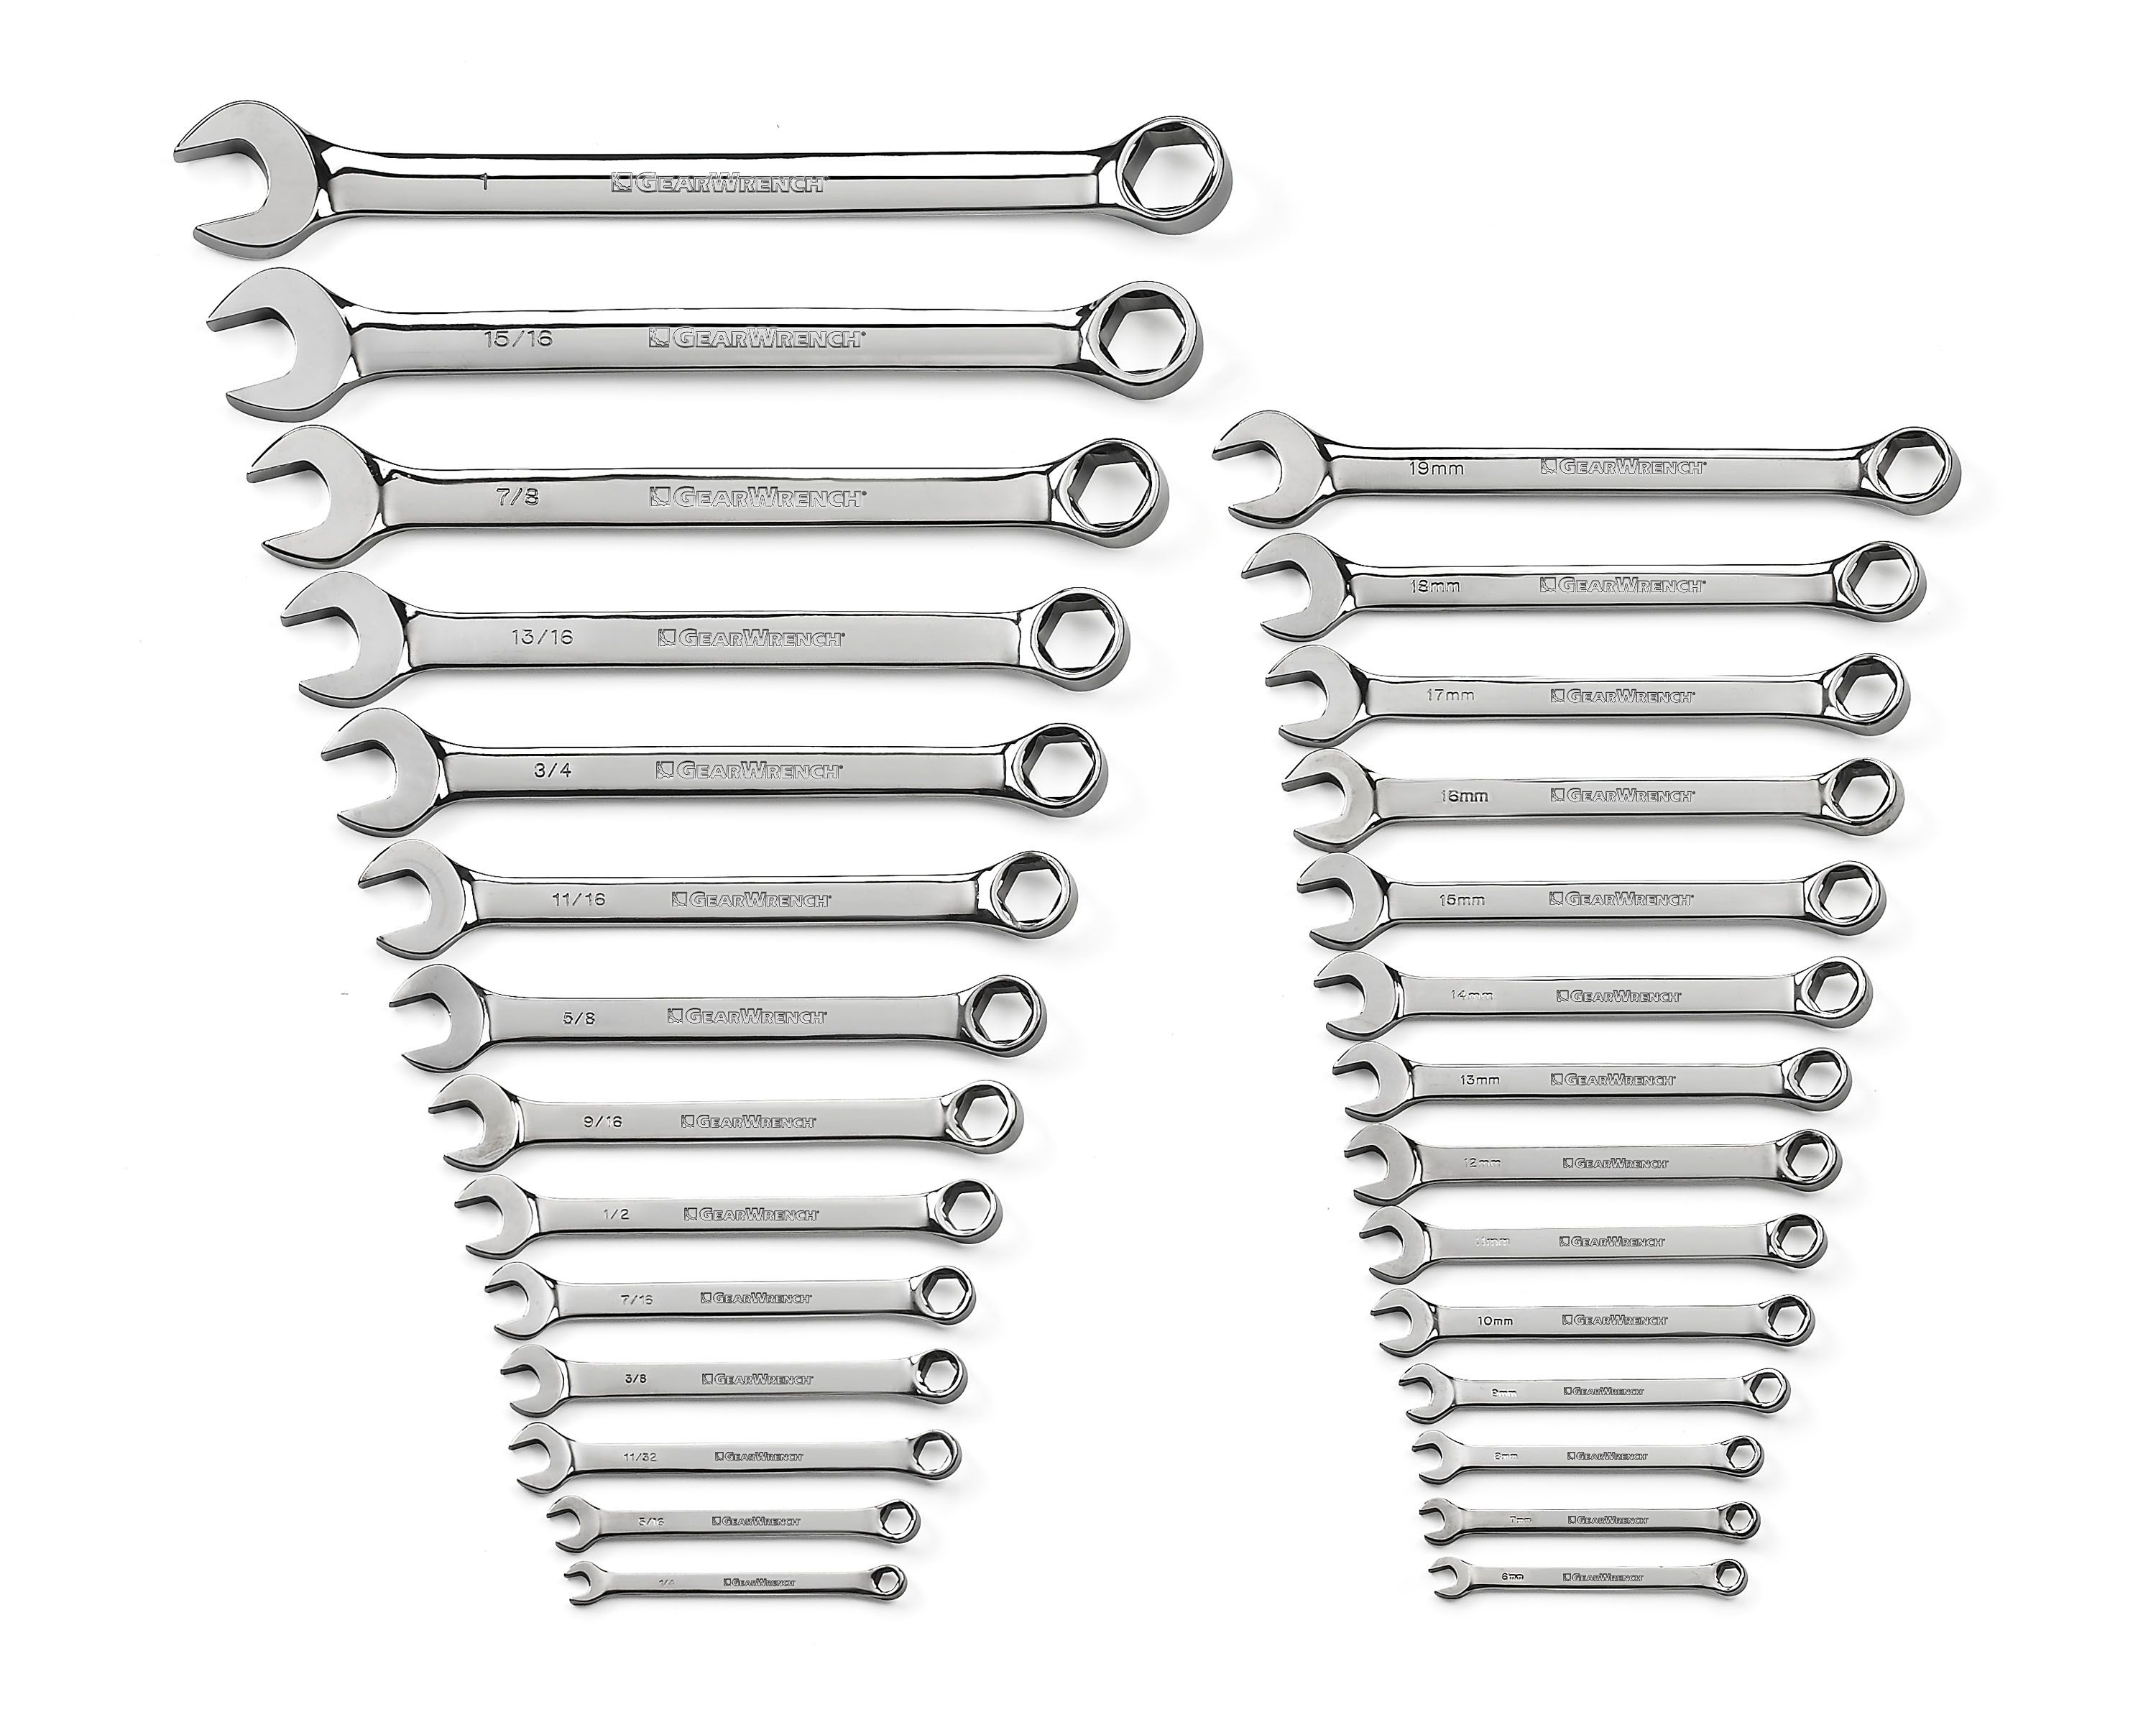 GearWrench 28 pc. Full Polish Standard/Metric 6-Point Combination Wrench Set